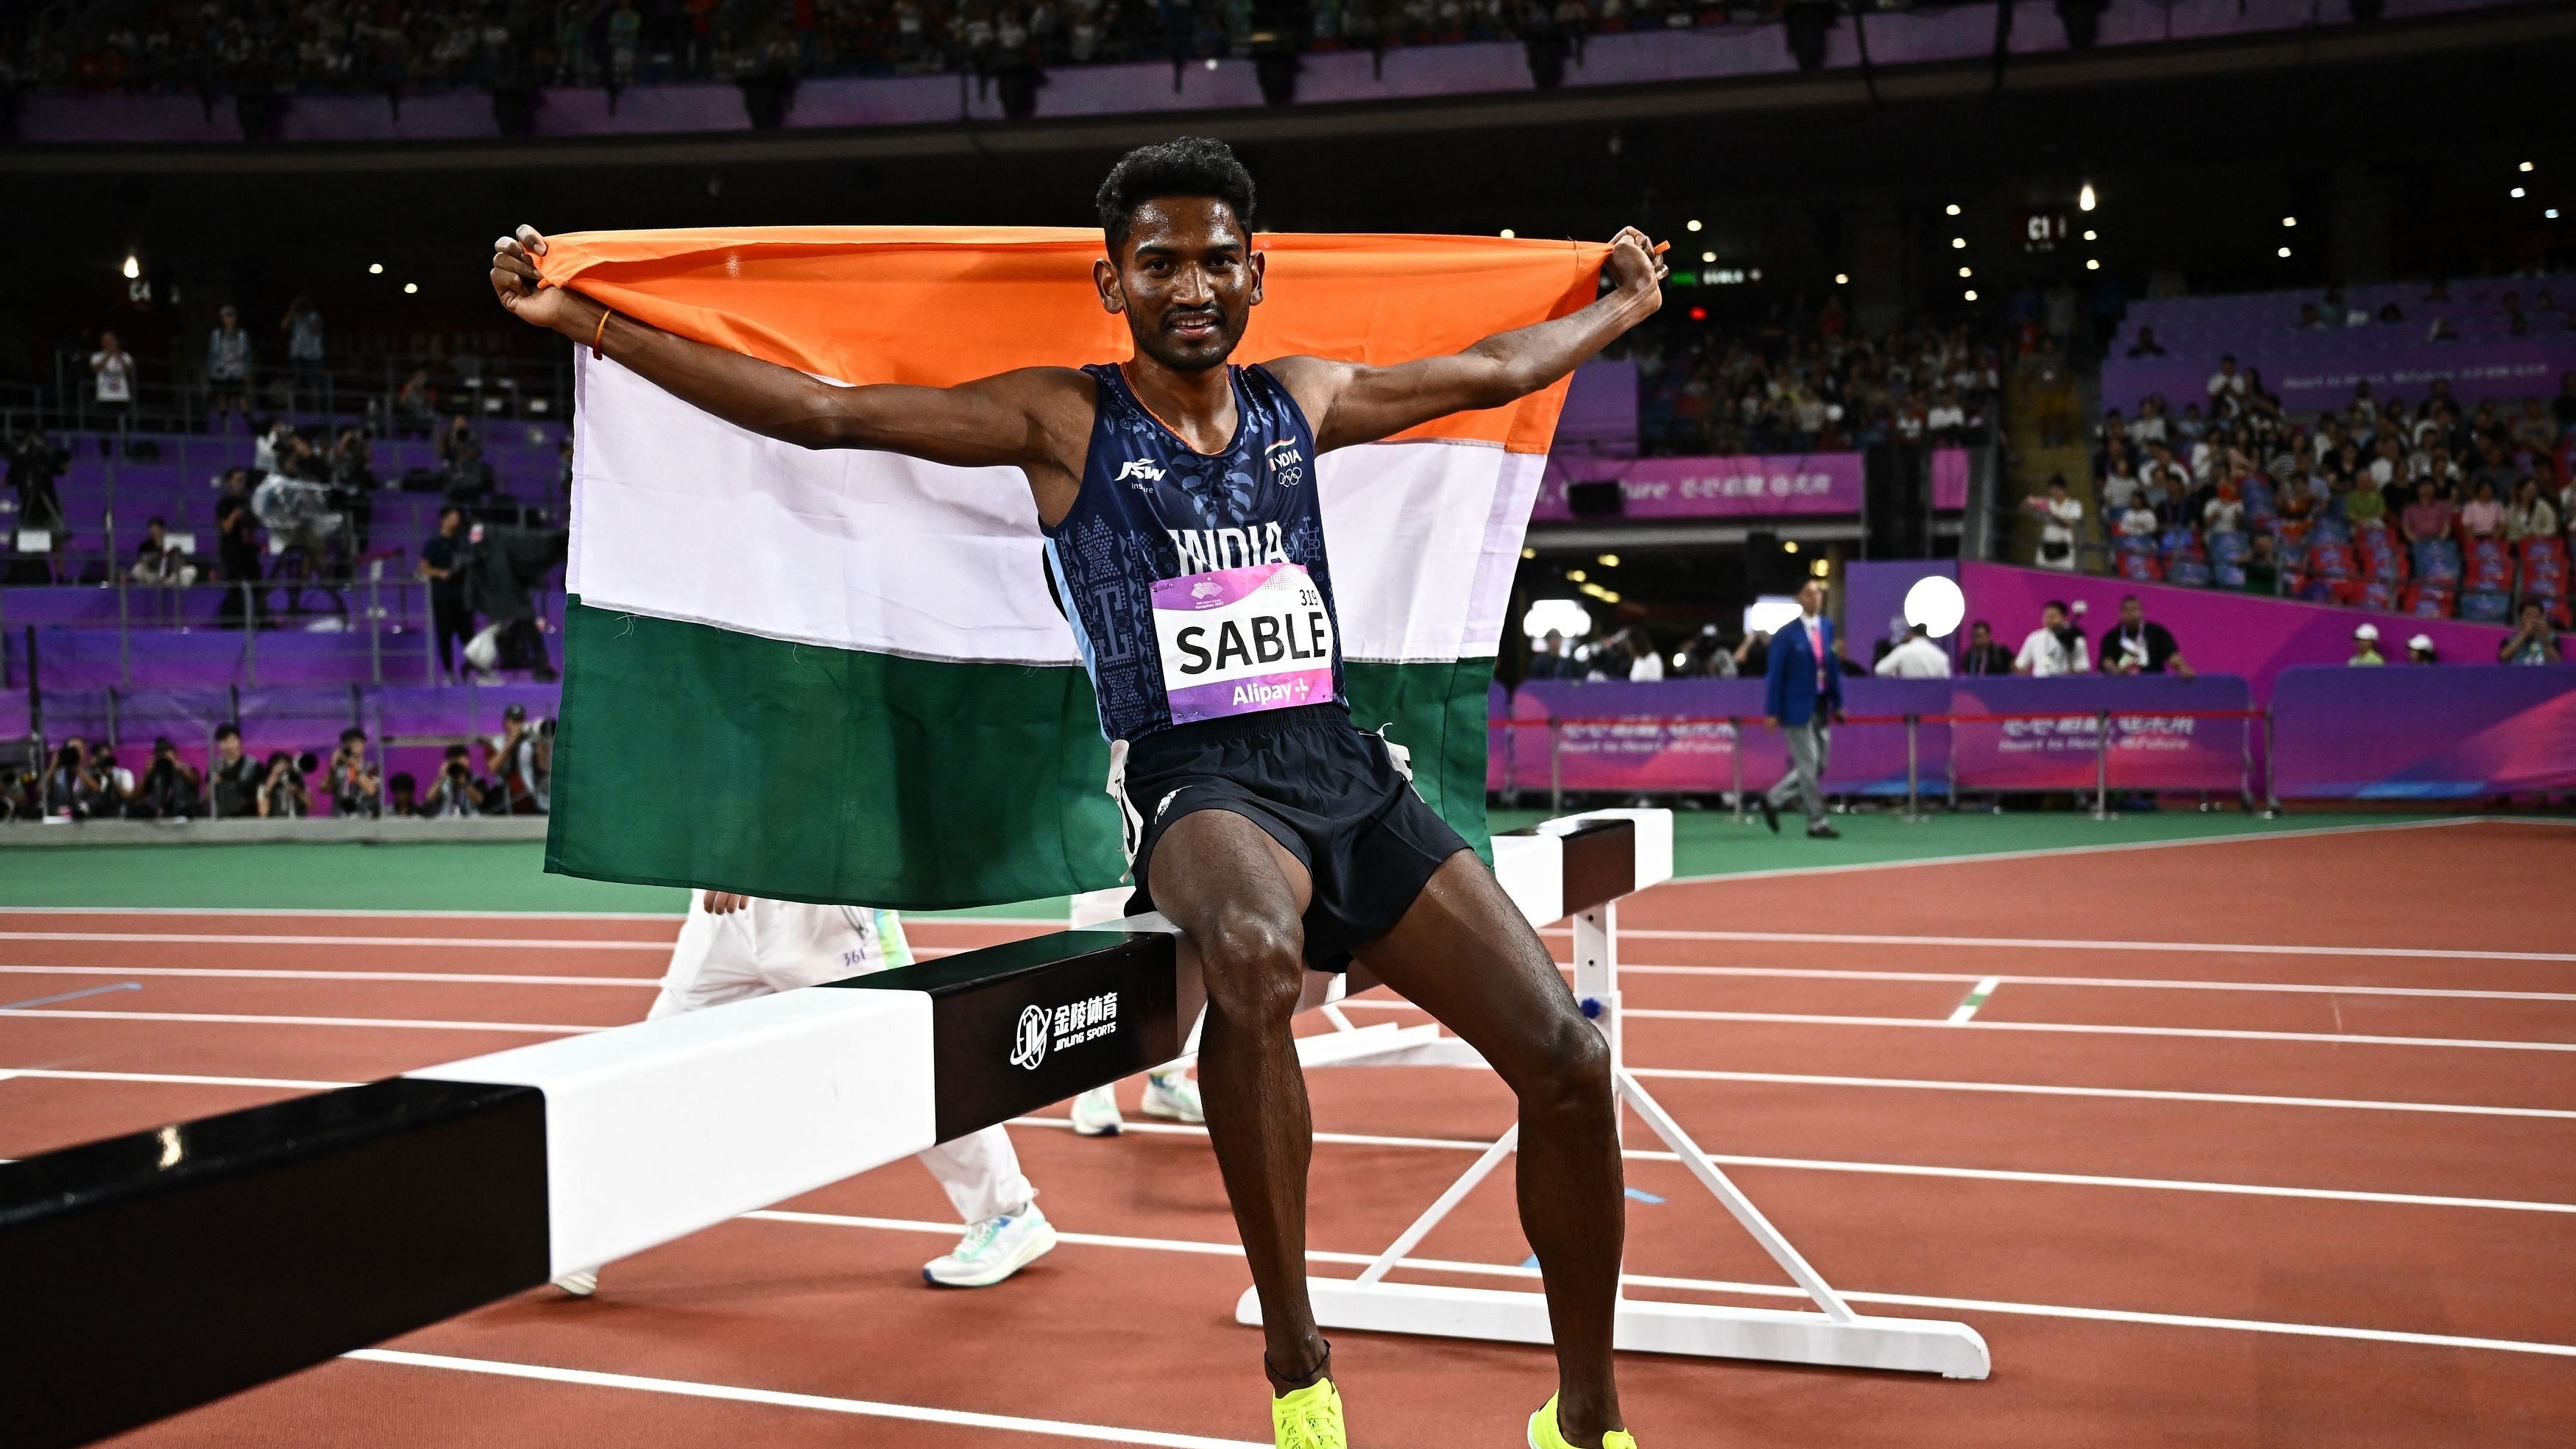 <div class="paragraphs"><p> India's Avinash Sable celebrates after winning the gold medal in the men's 3000m steeplechase final</p></div>